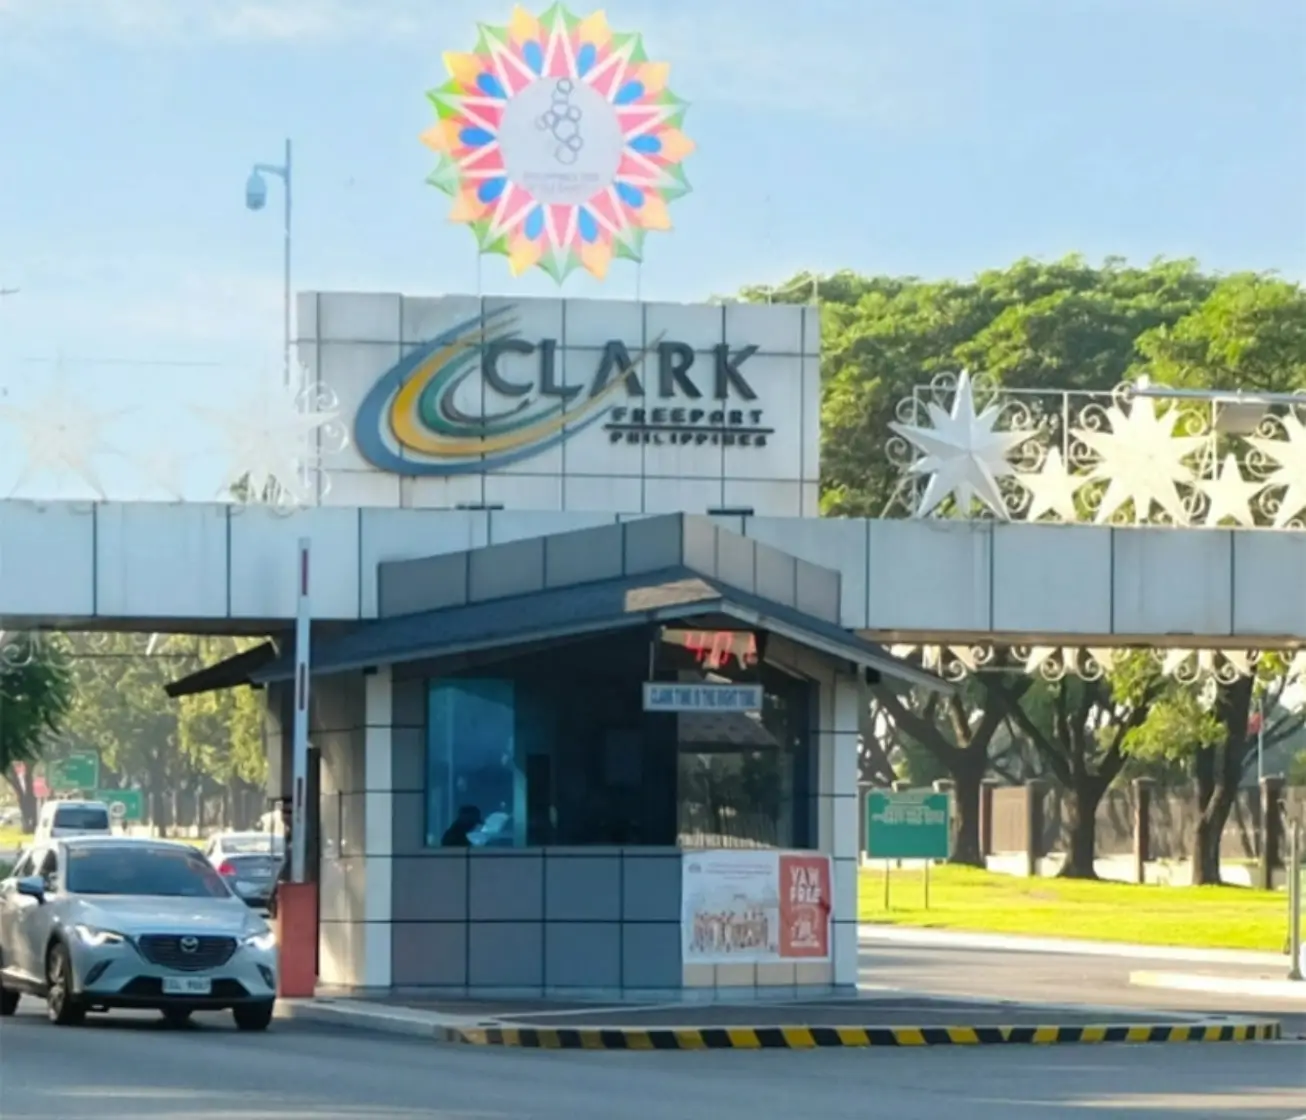 To live in New Clark City